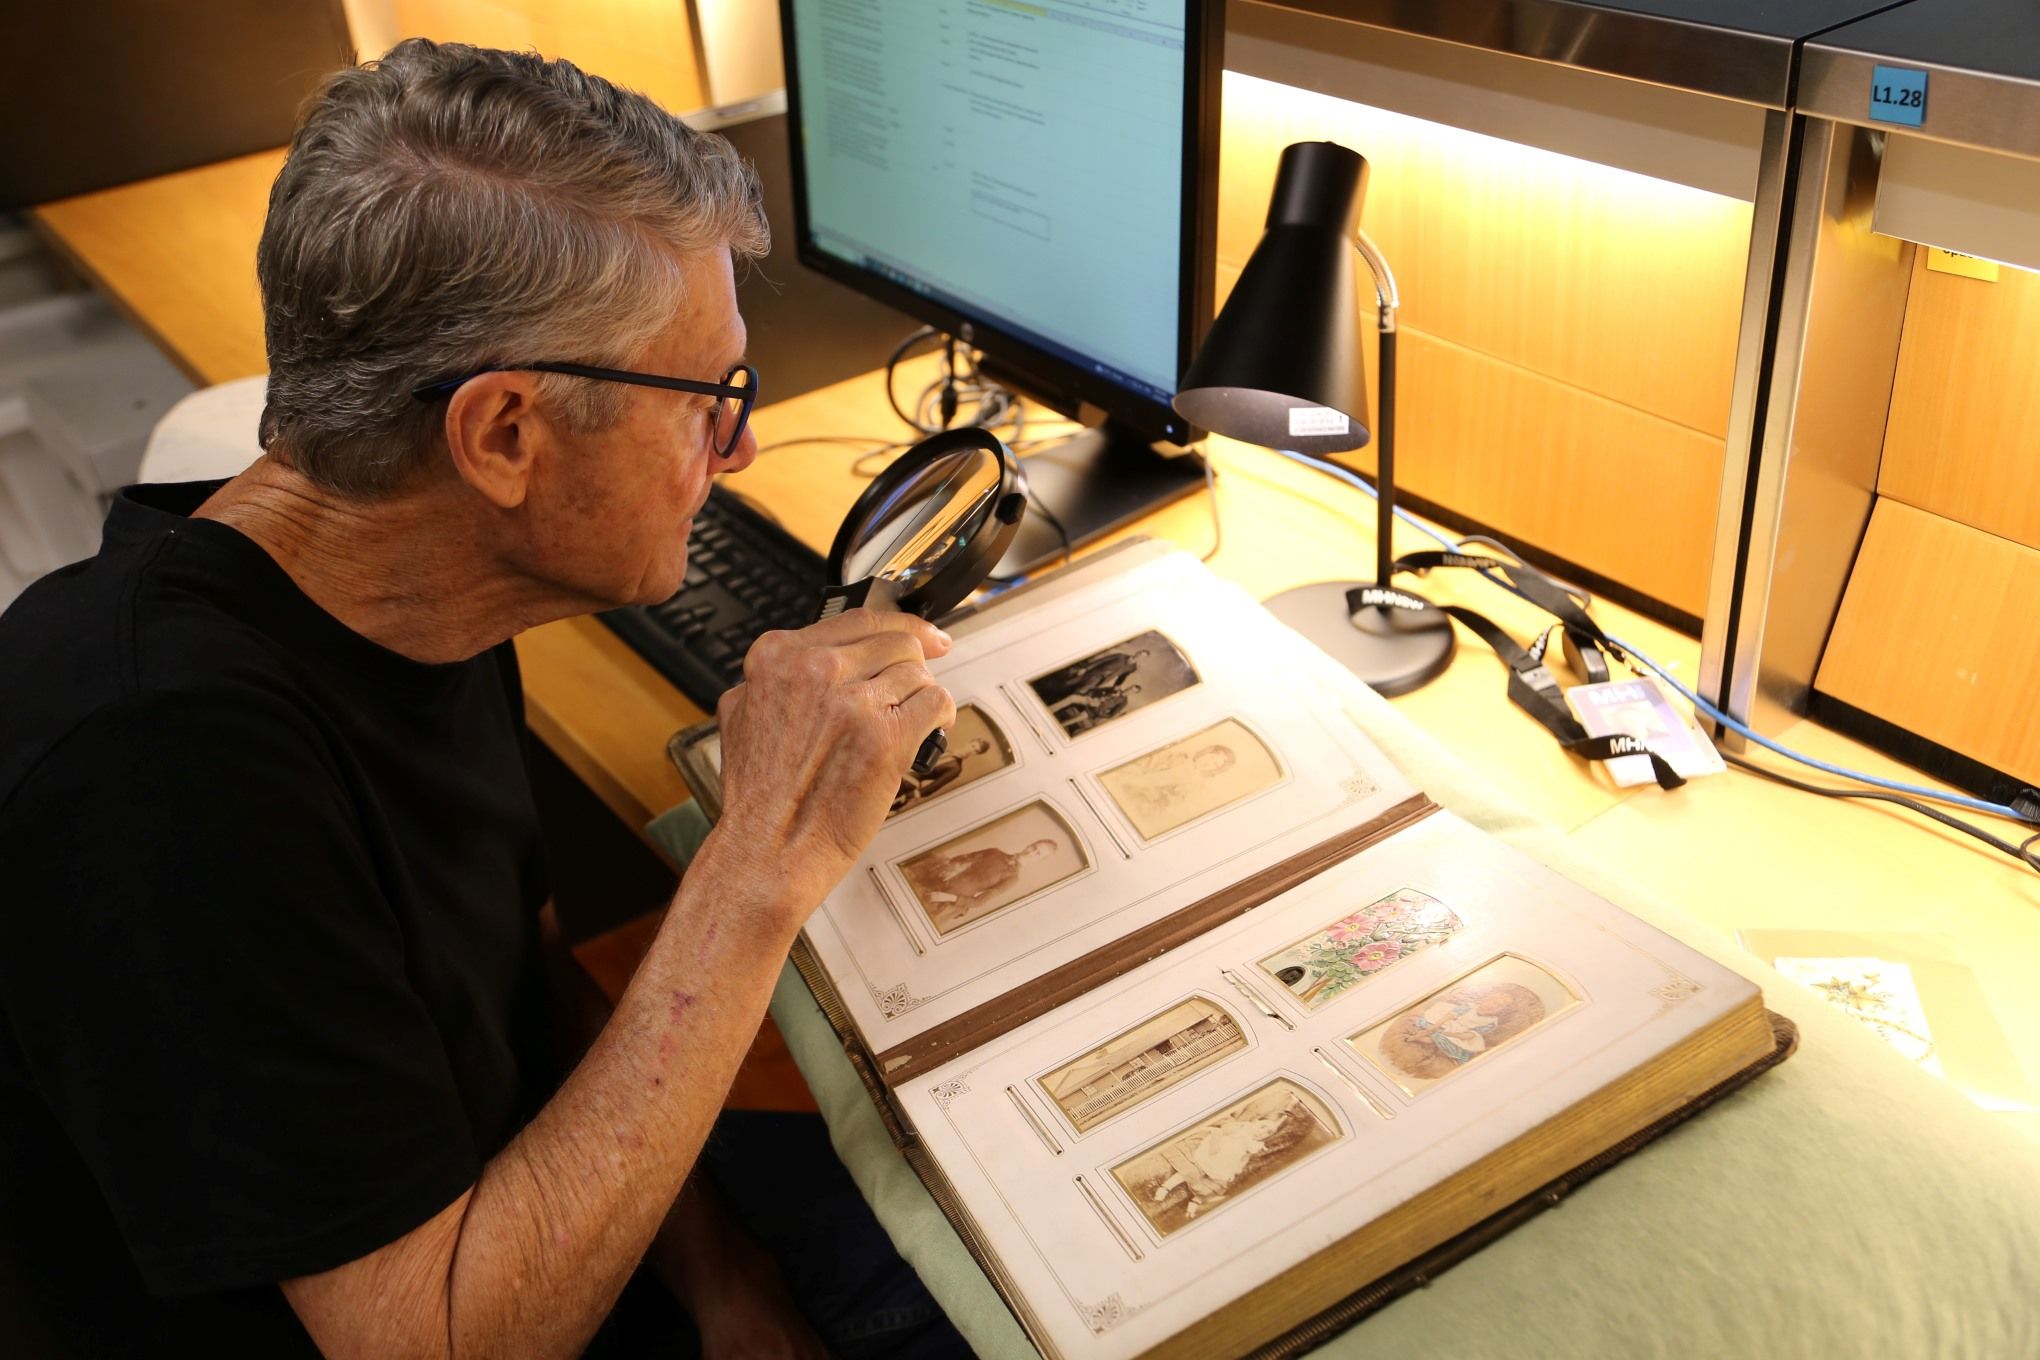 A man sits at a desk and looks at an album of pictures through a magnifying glass